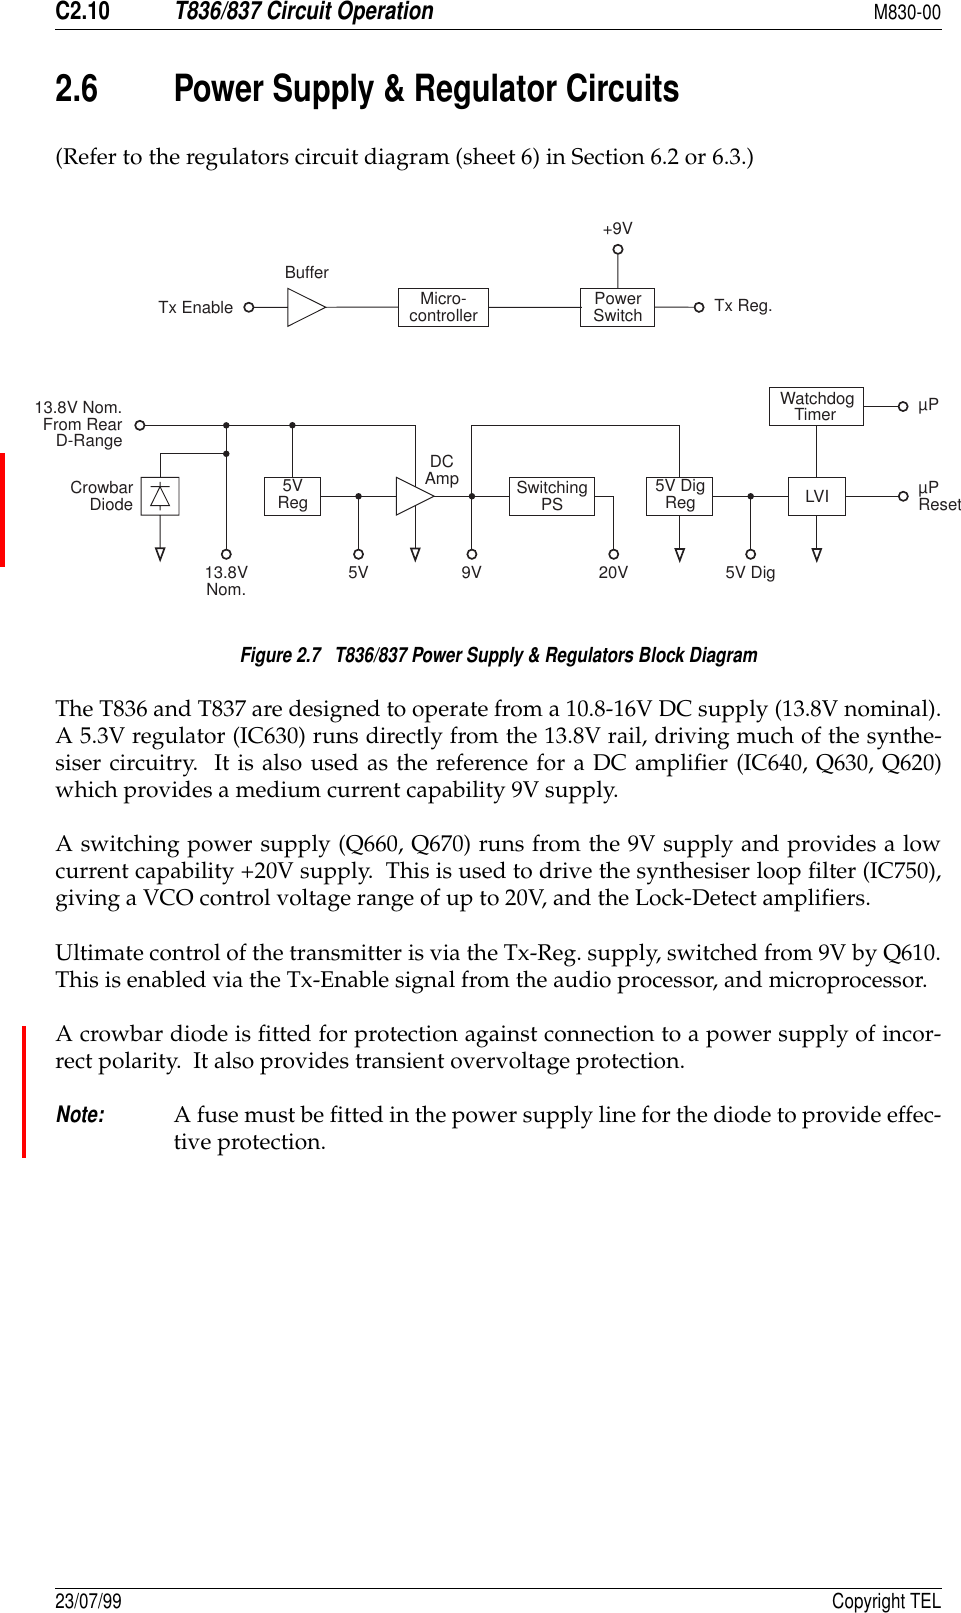 C2.10T836/837 Circuit OperationM830-0023/07/99 Copyright TEL2.6 Power Supply &amp; Regulator Circuits (Refer to the regulators circuit diagram (sheet 6) in Section 6.2 or 6.3.)Figure 2.7   T836/837 Power Supply &amp; Regulators Block DiagramThe T836 and T837 are designed to operate from a 10.8-16V DC supply (13.8V nominal).A 5.3V regulator (IC630) runs directly from the 13.8V rail, driving much of the synthe-siser circuitry.  It is also used as the reference for a DC amplifier (IC640, Q630, Q620)which provides a medium current capability 9V supply.A switching power supply (Q660, Q670) runs from the 9V supply and provides a lowcurrent capability +20V supply.  This is used to drive the synthesiser loop filter (IC750),giving a VCO control voltage range of up to 20V, and the Lock-Detect amplifiers.Ultimate control of the transmitter is via the Tx-Reg. supply, switched from 9V by Q610.This is enabled via the Tx-Enable signal from the audio processor, and microprocessor.  A crowbar diode is fitted for protection against connection to a power supply of incor-rect polarity.  It also provides transient overvoltage protection.Note:A fuse must be fitted in the power supply line for the diode to provide effec-tive protection.CrowbarDiode LVI5VRegDCAmp SwitchingPS 5V DigRegPowerSwitch13.8VNom. 5V 5V Dig9V 20V13.8V Nom.From RearD-RangeTx EnableBufferTx Reg.+9VµPWatchdogTimerMicro-controllerµPReset